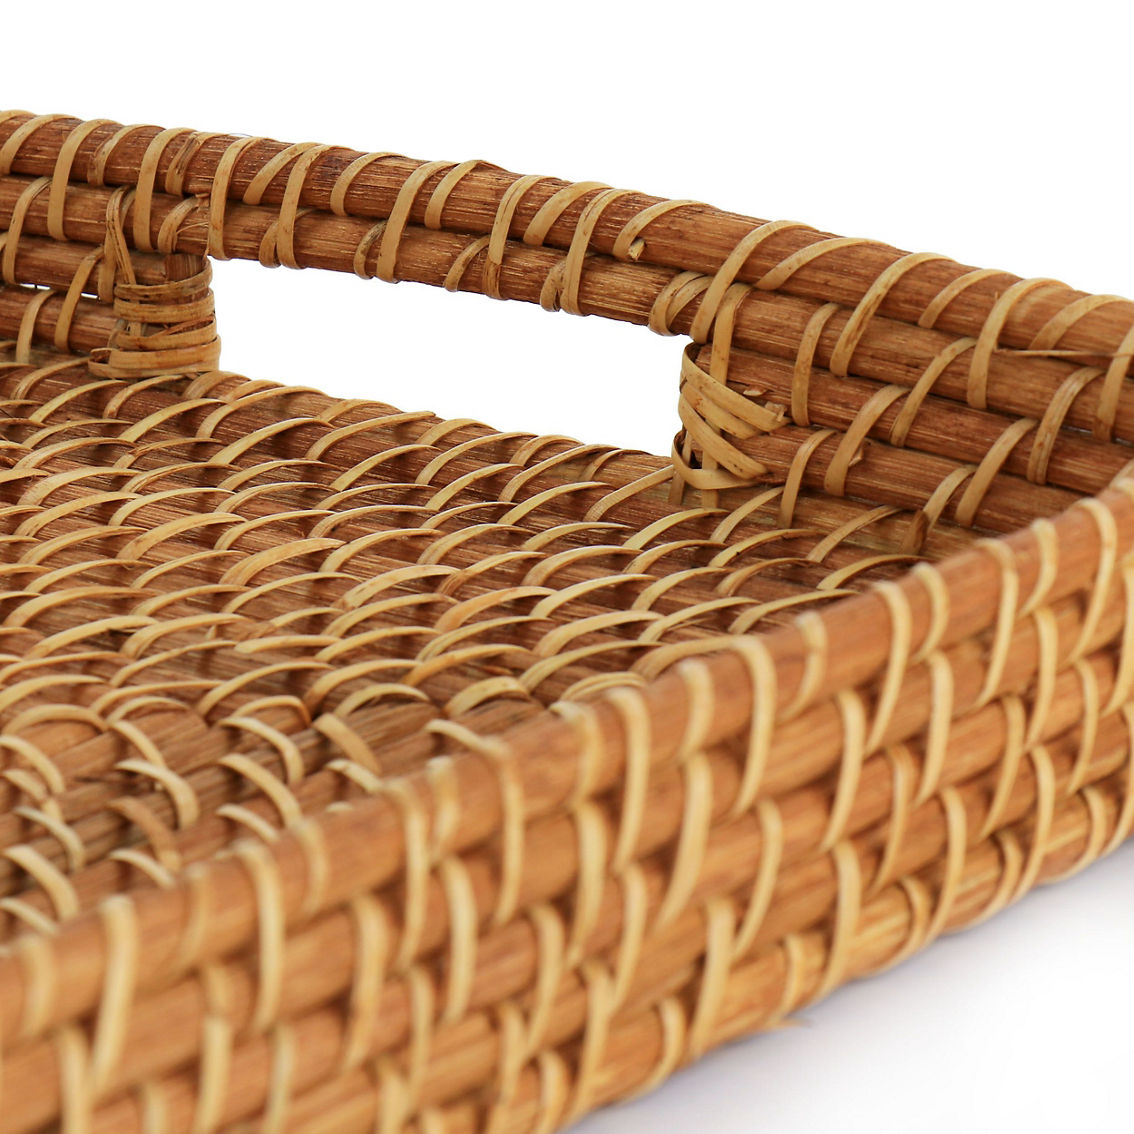 Martha Stewart 16 Inch Rattan Woven Serving Tray in Brown - Image 4 of 5